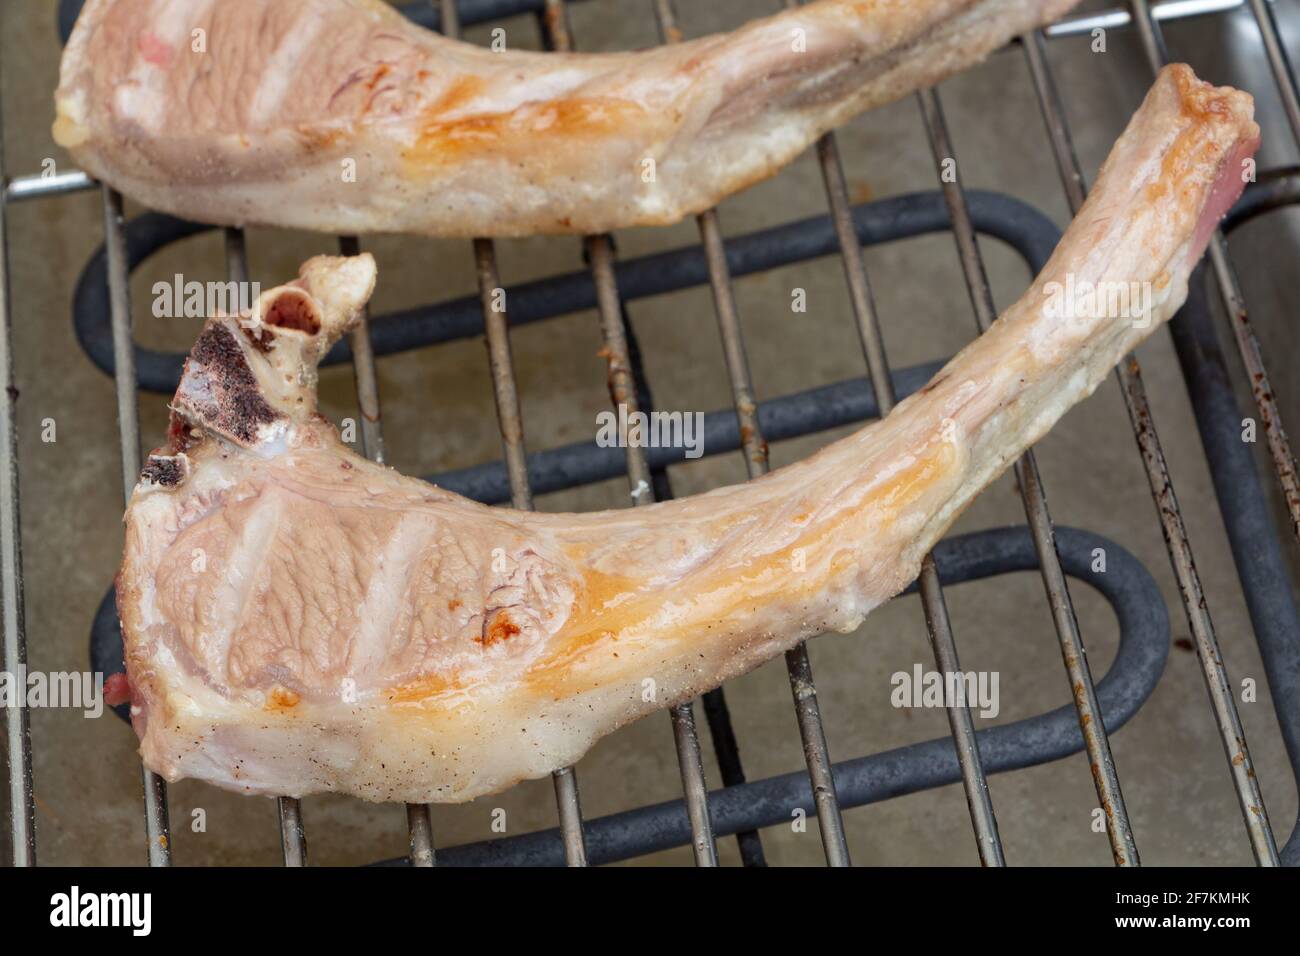 Lamb chops grilling on electric barbecue Stock Photo